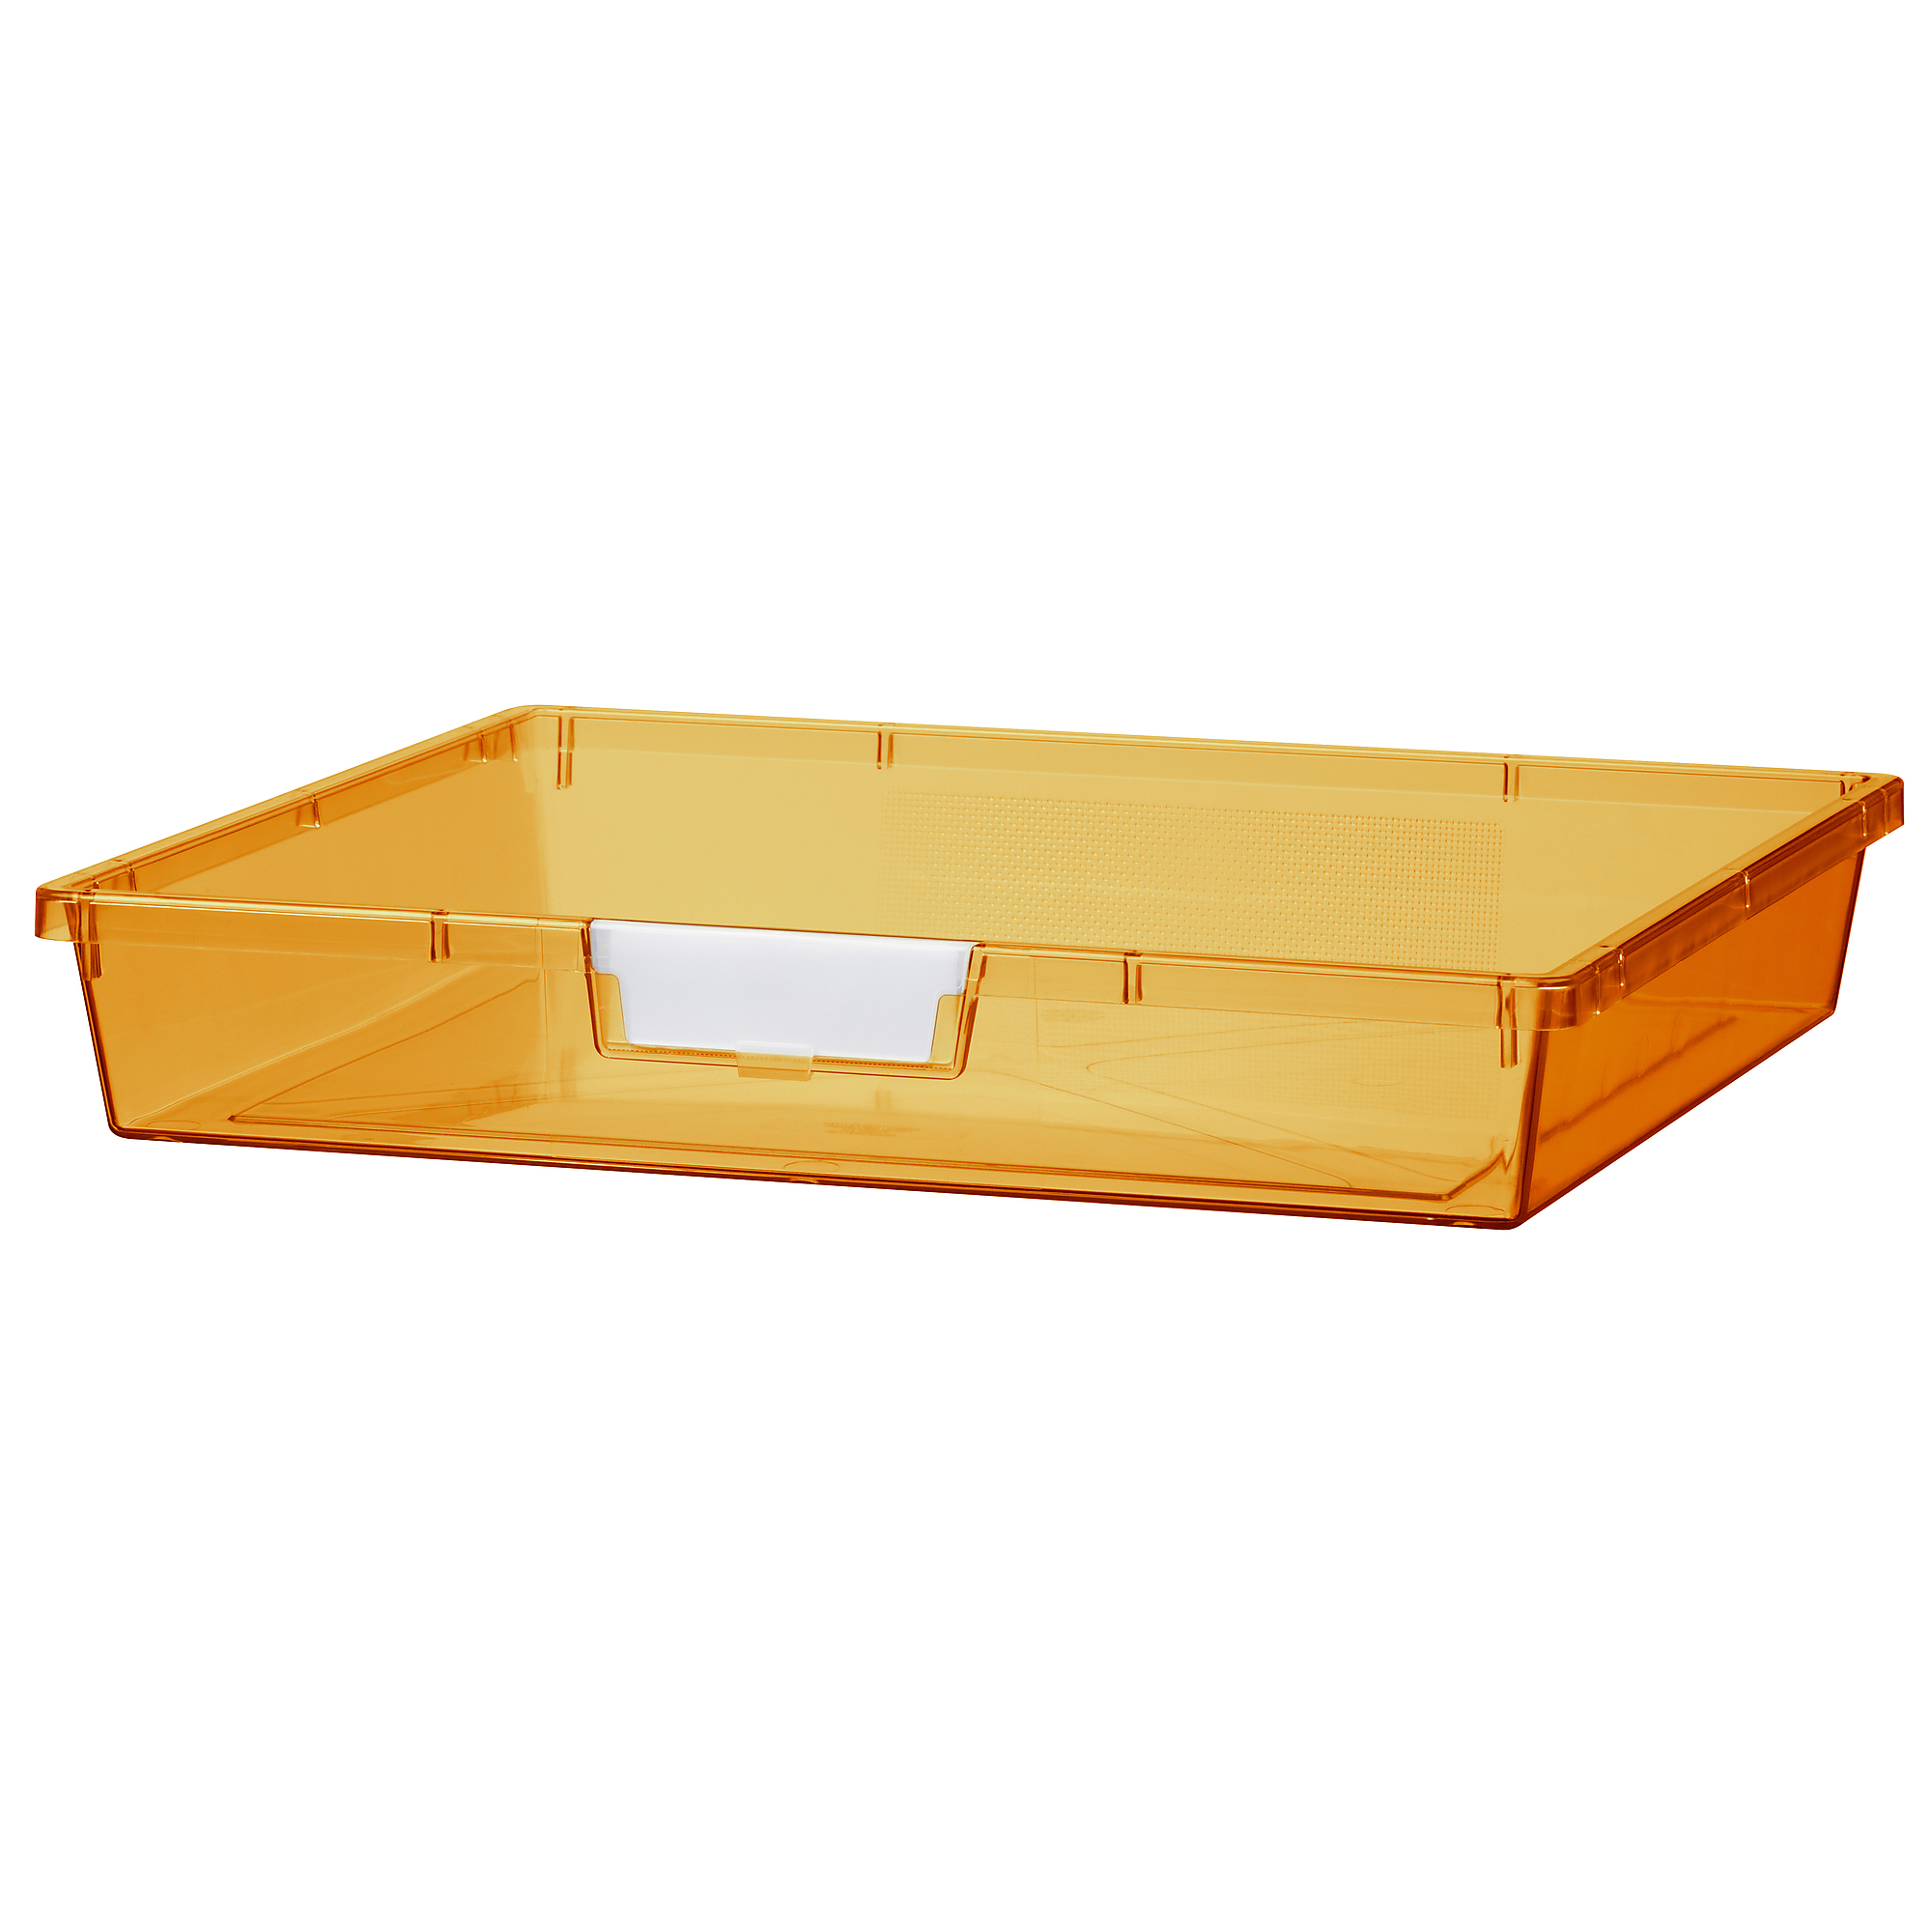 Certwood StorWerks, Wide Line Tray 3Inch in Neon Orange - 3 Pack, Included (qty.) 3, Material Plastic, Height 12 in, Model CE1956FO3